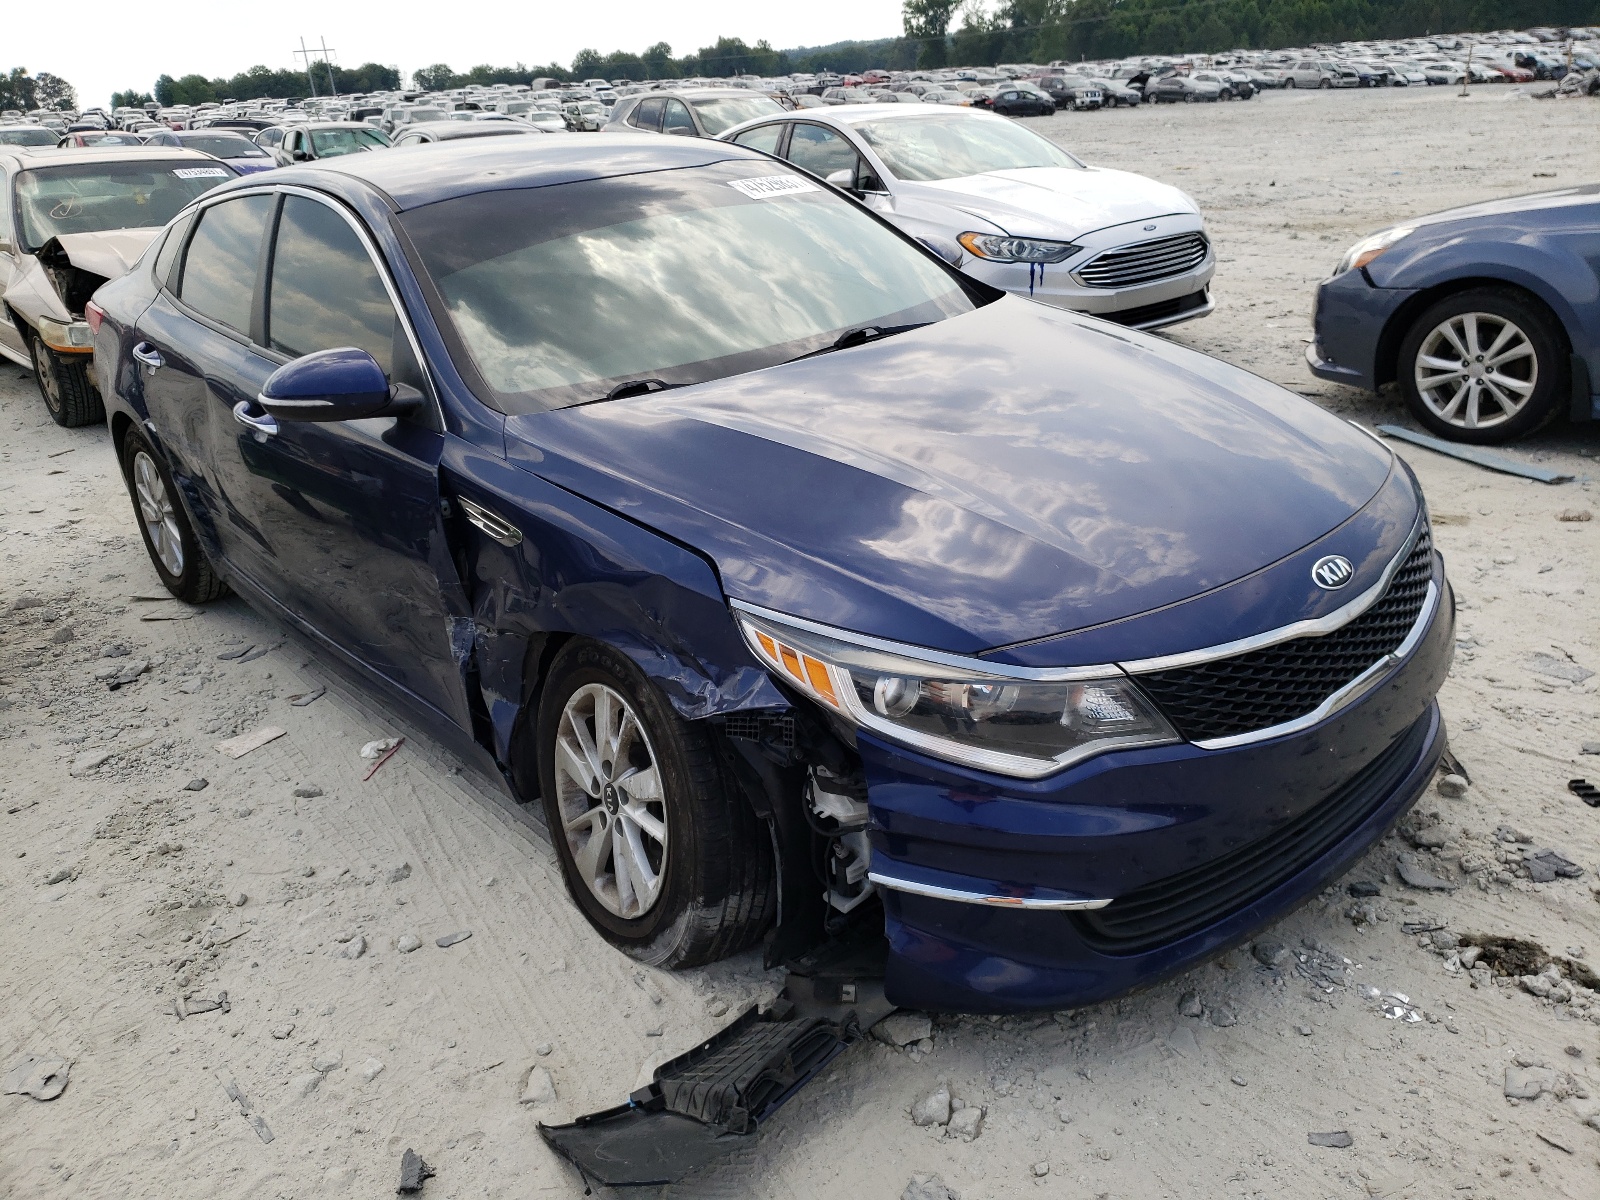 Wrecked & Salvage KIA K5 for Sale in Trenton, New Jersey NJ: Damaged Cars  Auction